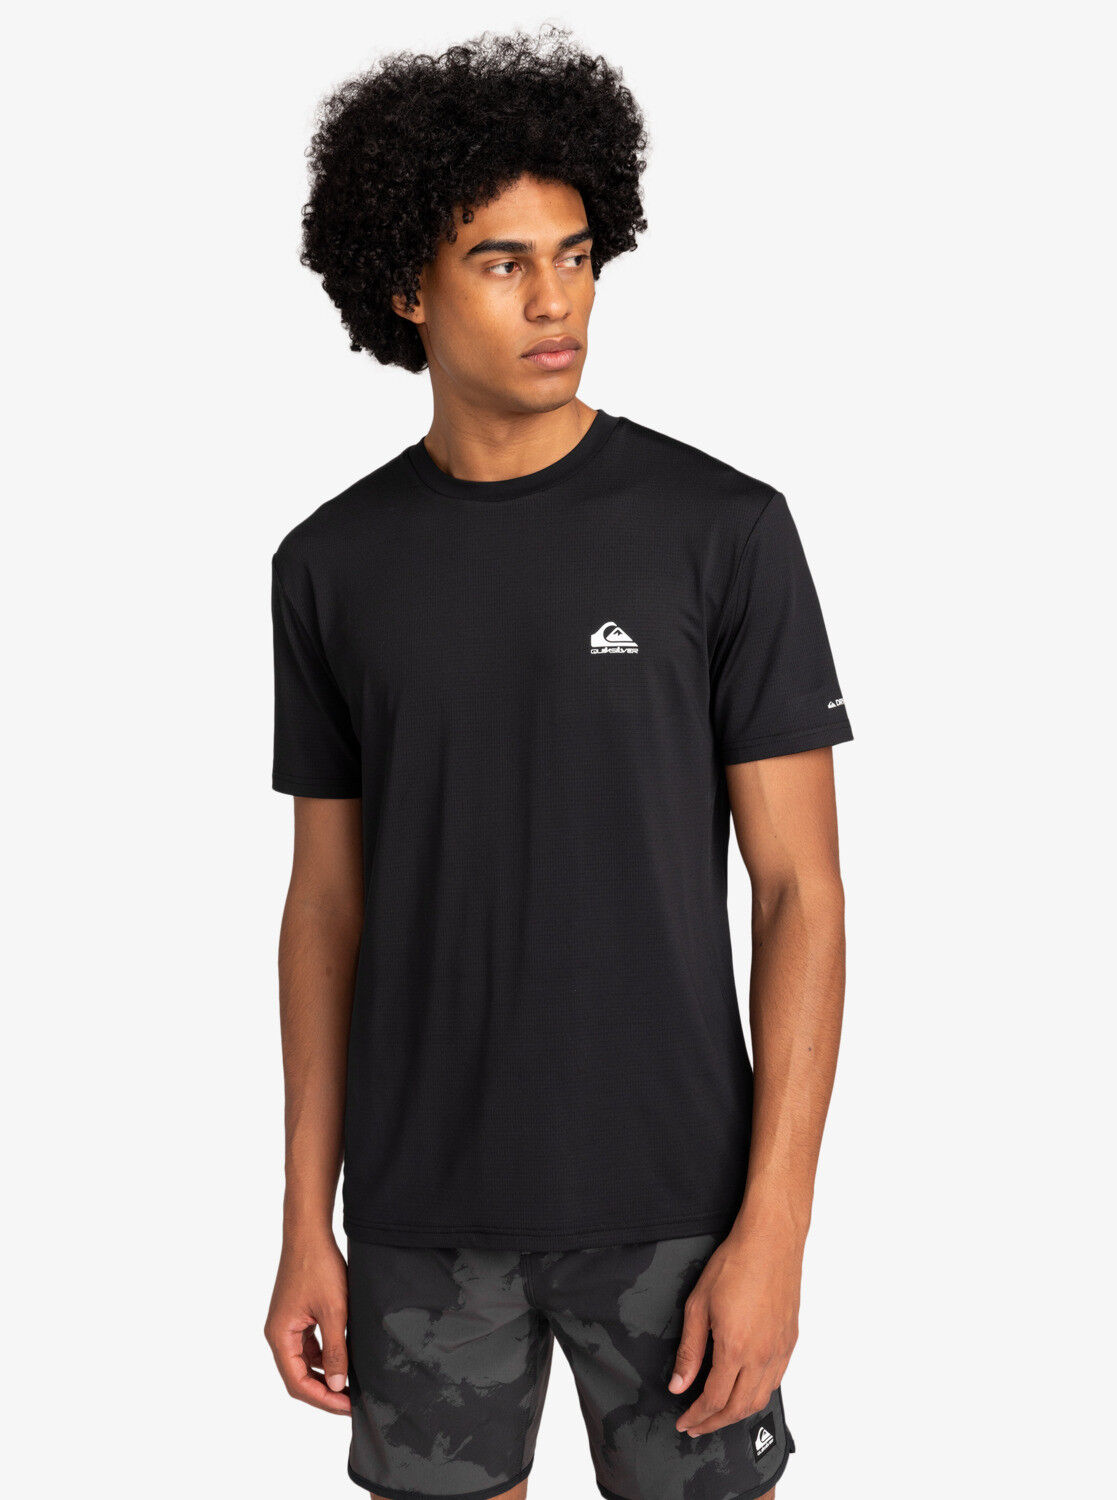 Quiksilver Lap Time Ss Tee - T-shirt homme | Hardloop